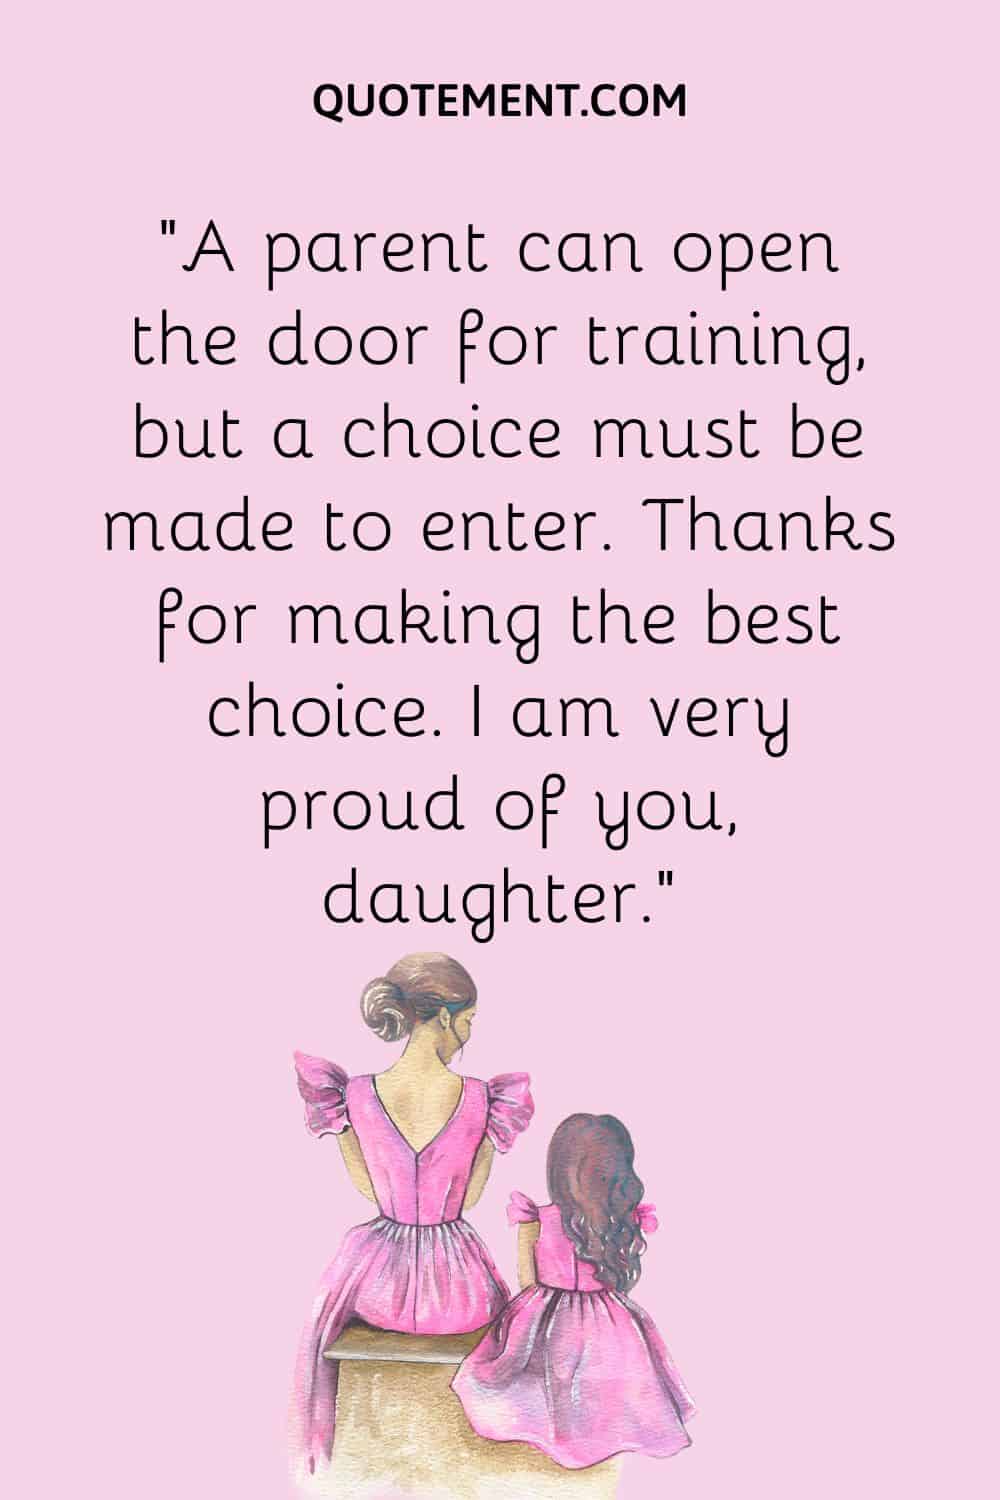 “A parent can open the door for training, but a choice must be made to enter. Thanks for making the best choice. I am very proud of you, daughter.”